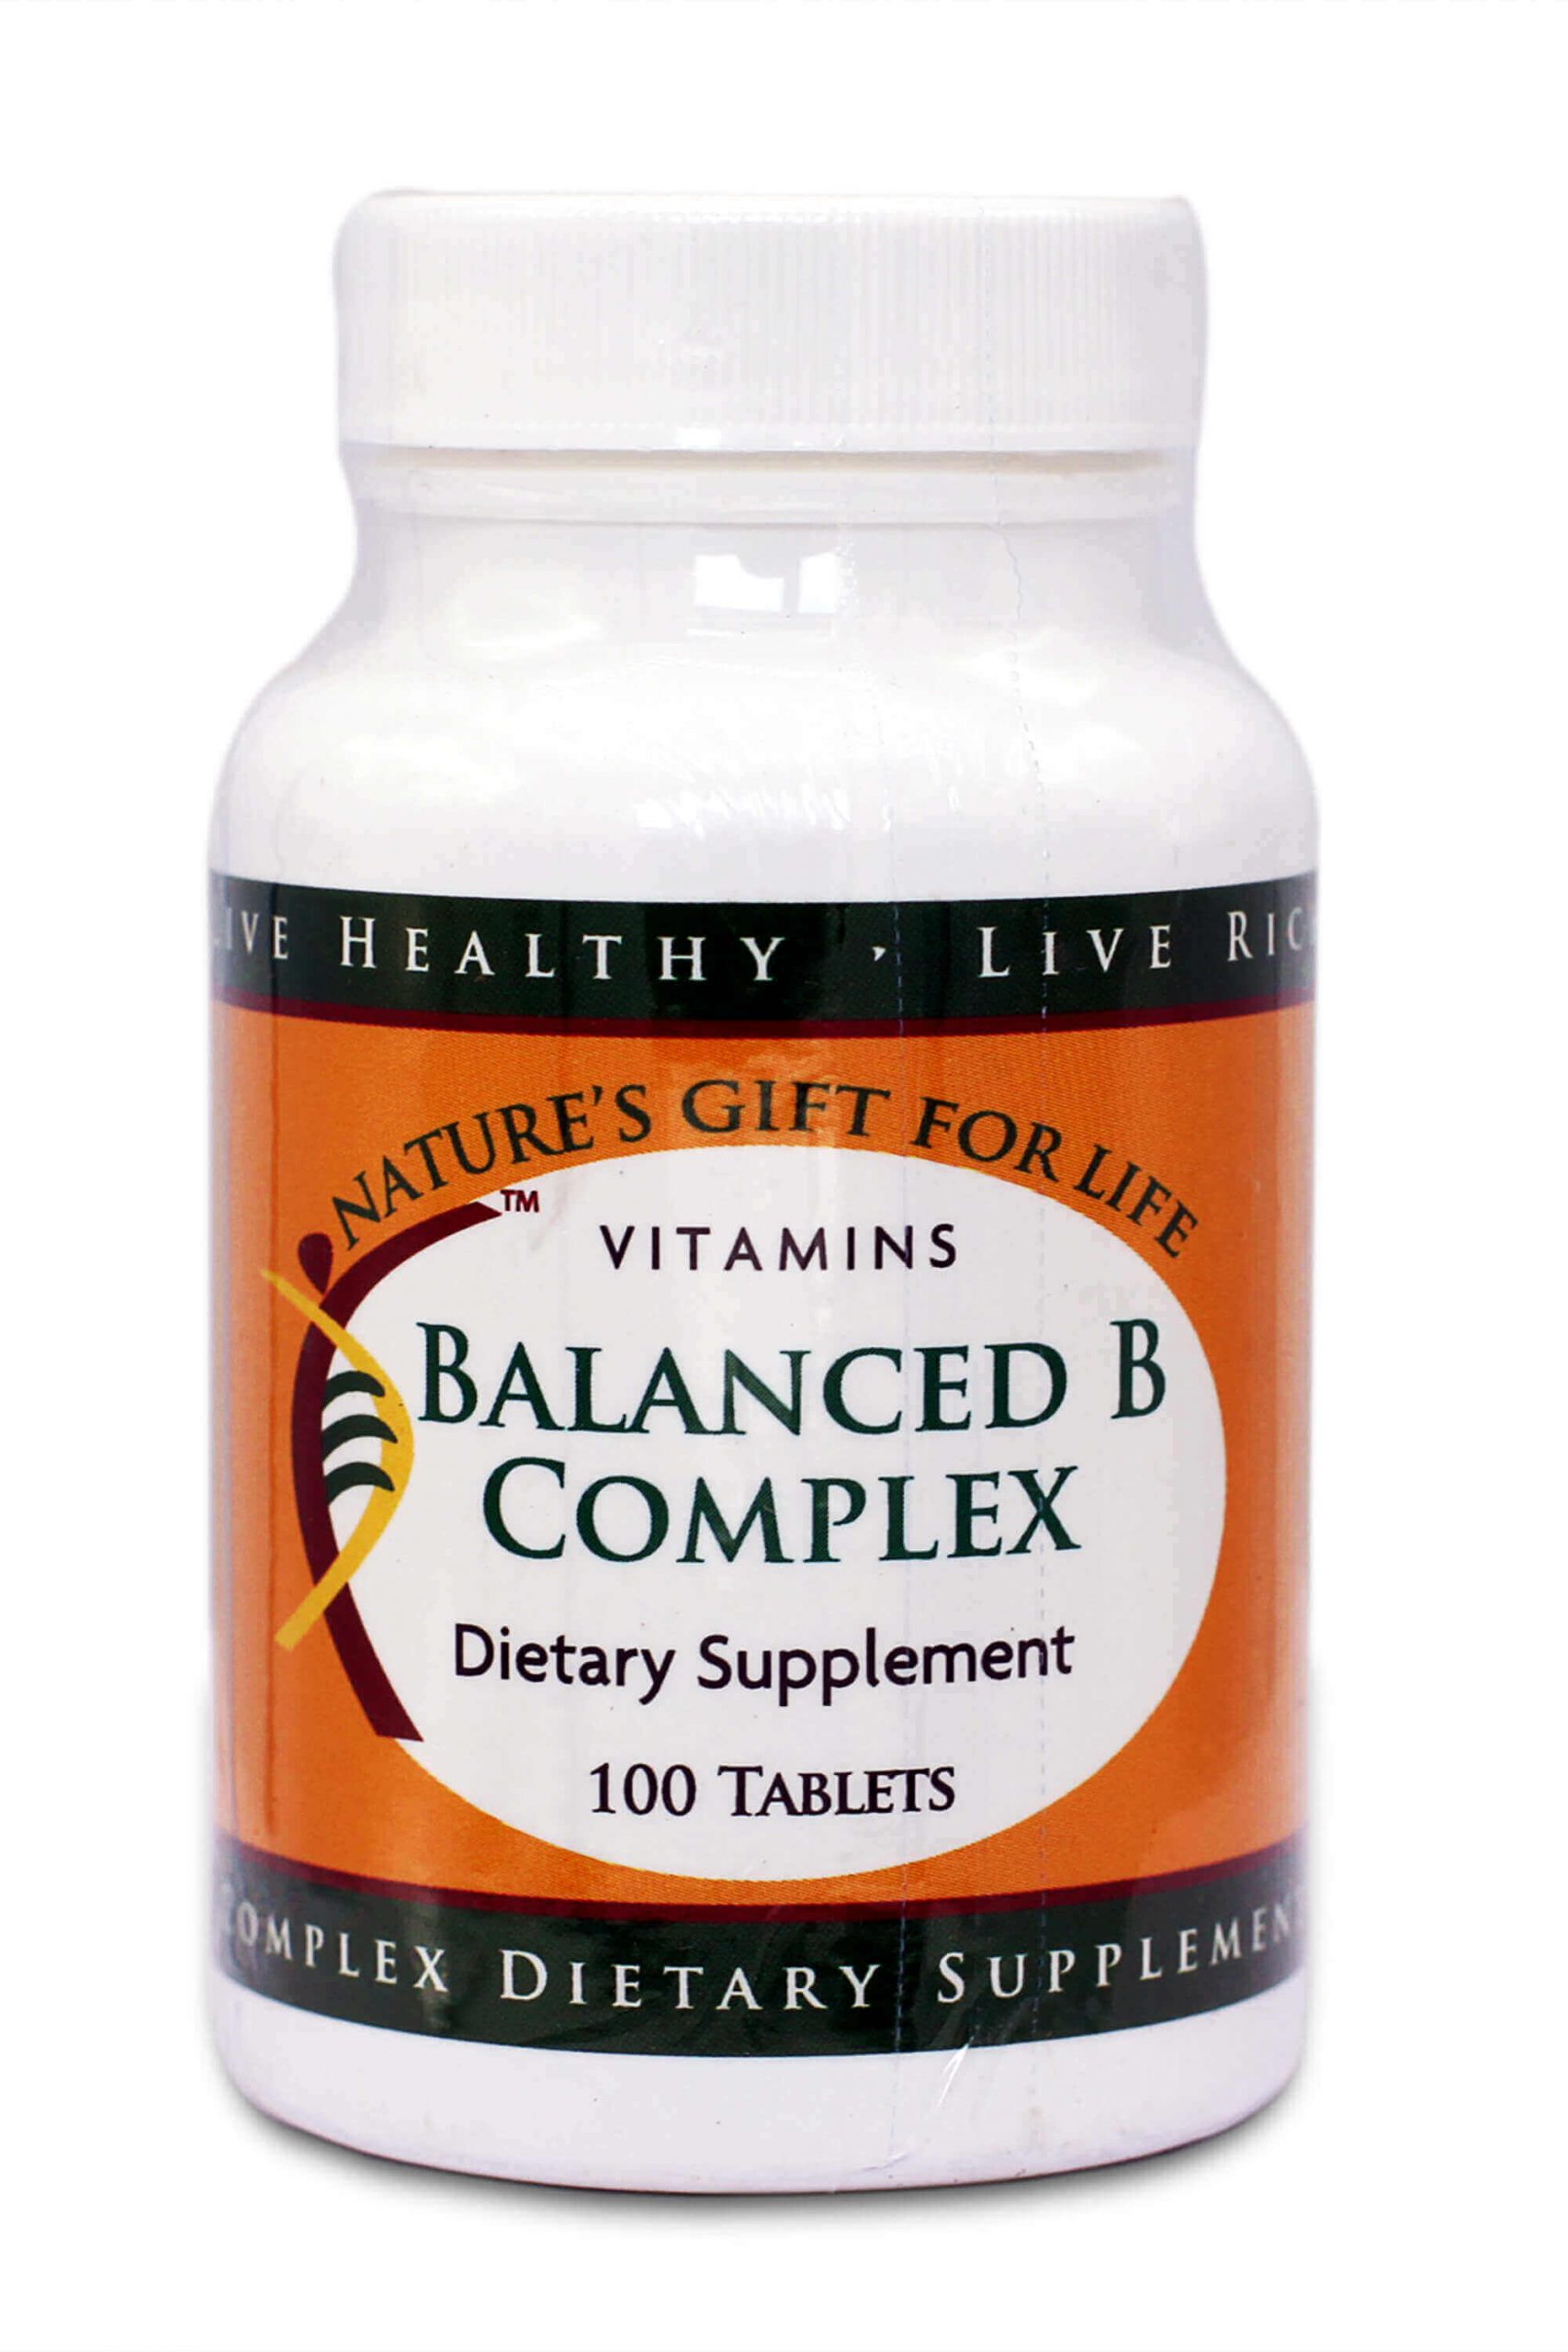 Balance B Complex | Nature's Gift For Life